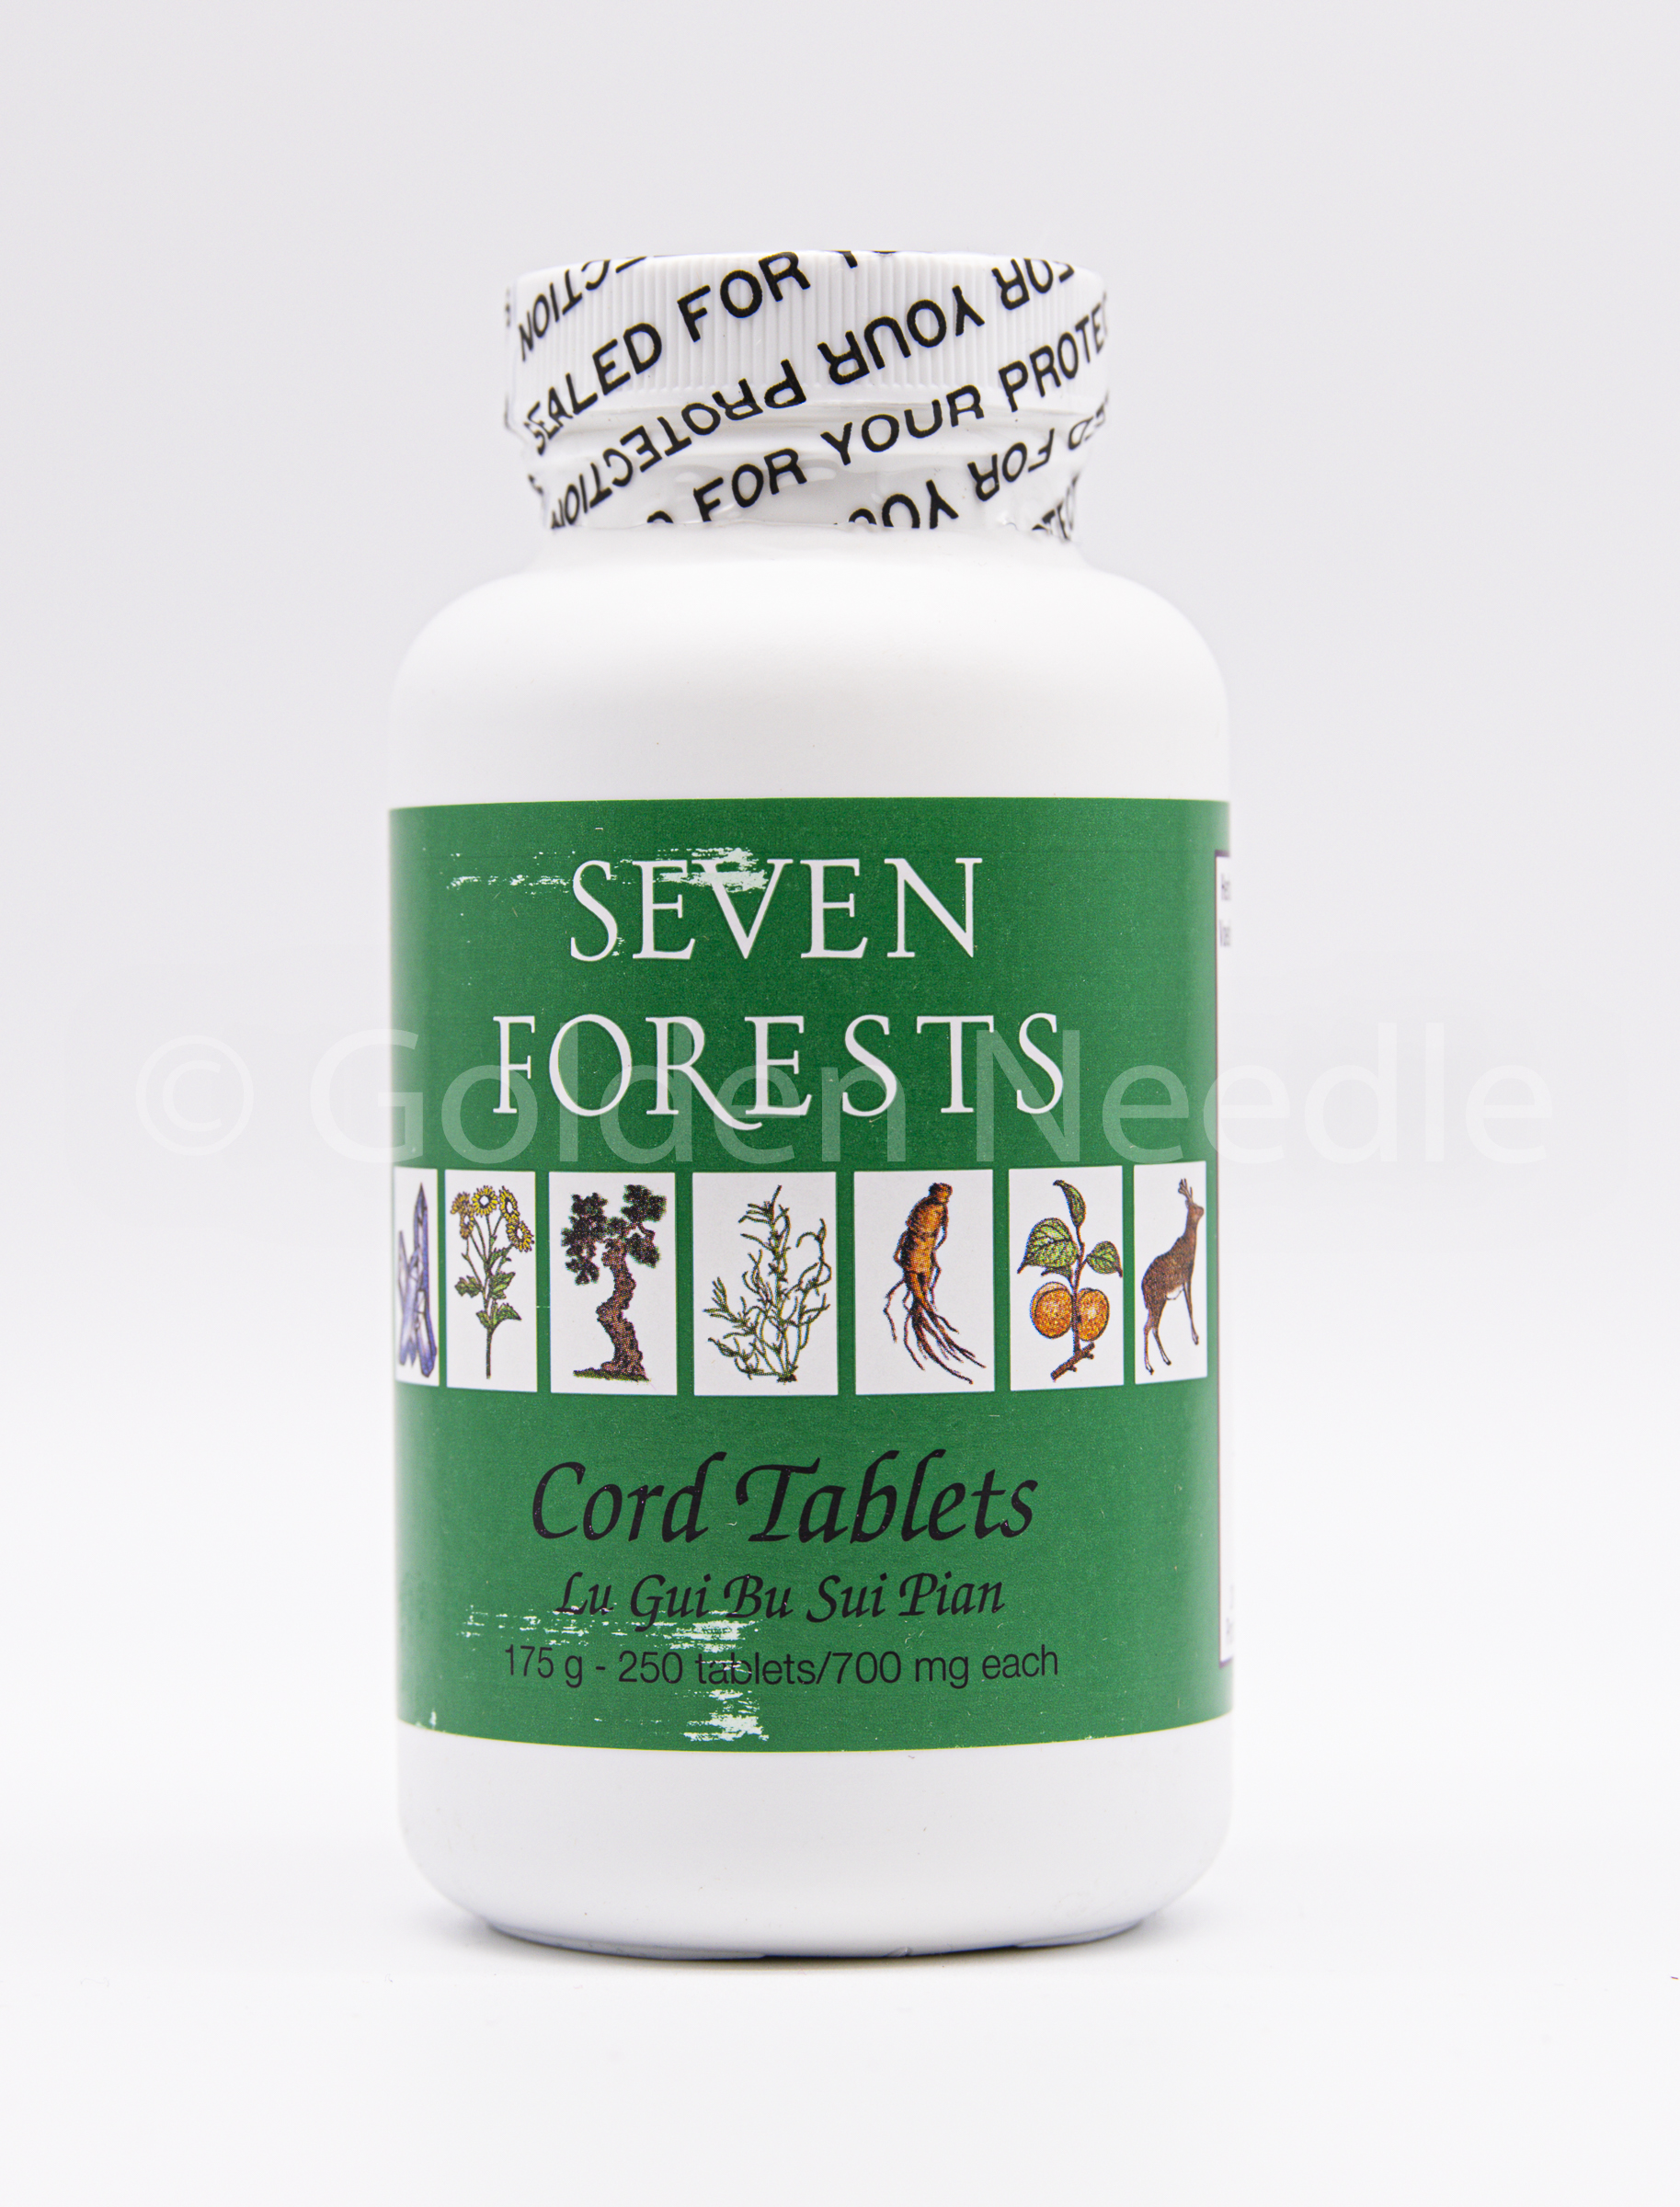 Cord Tablets, 250 tablets